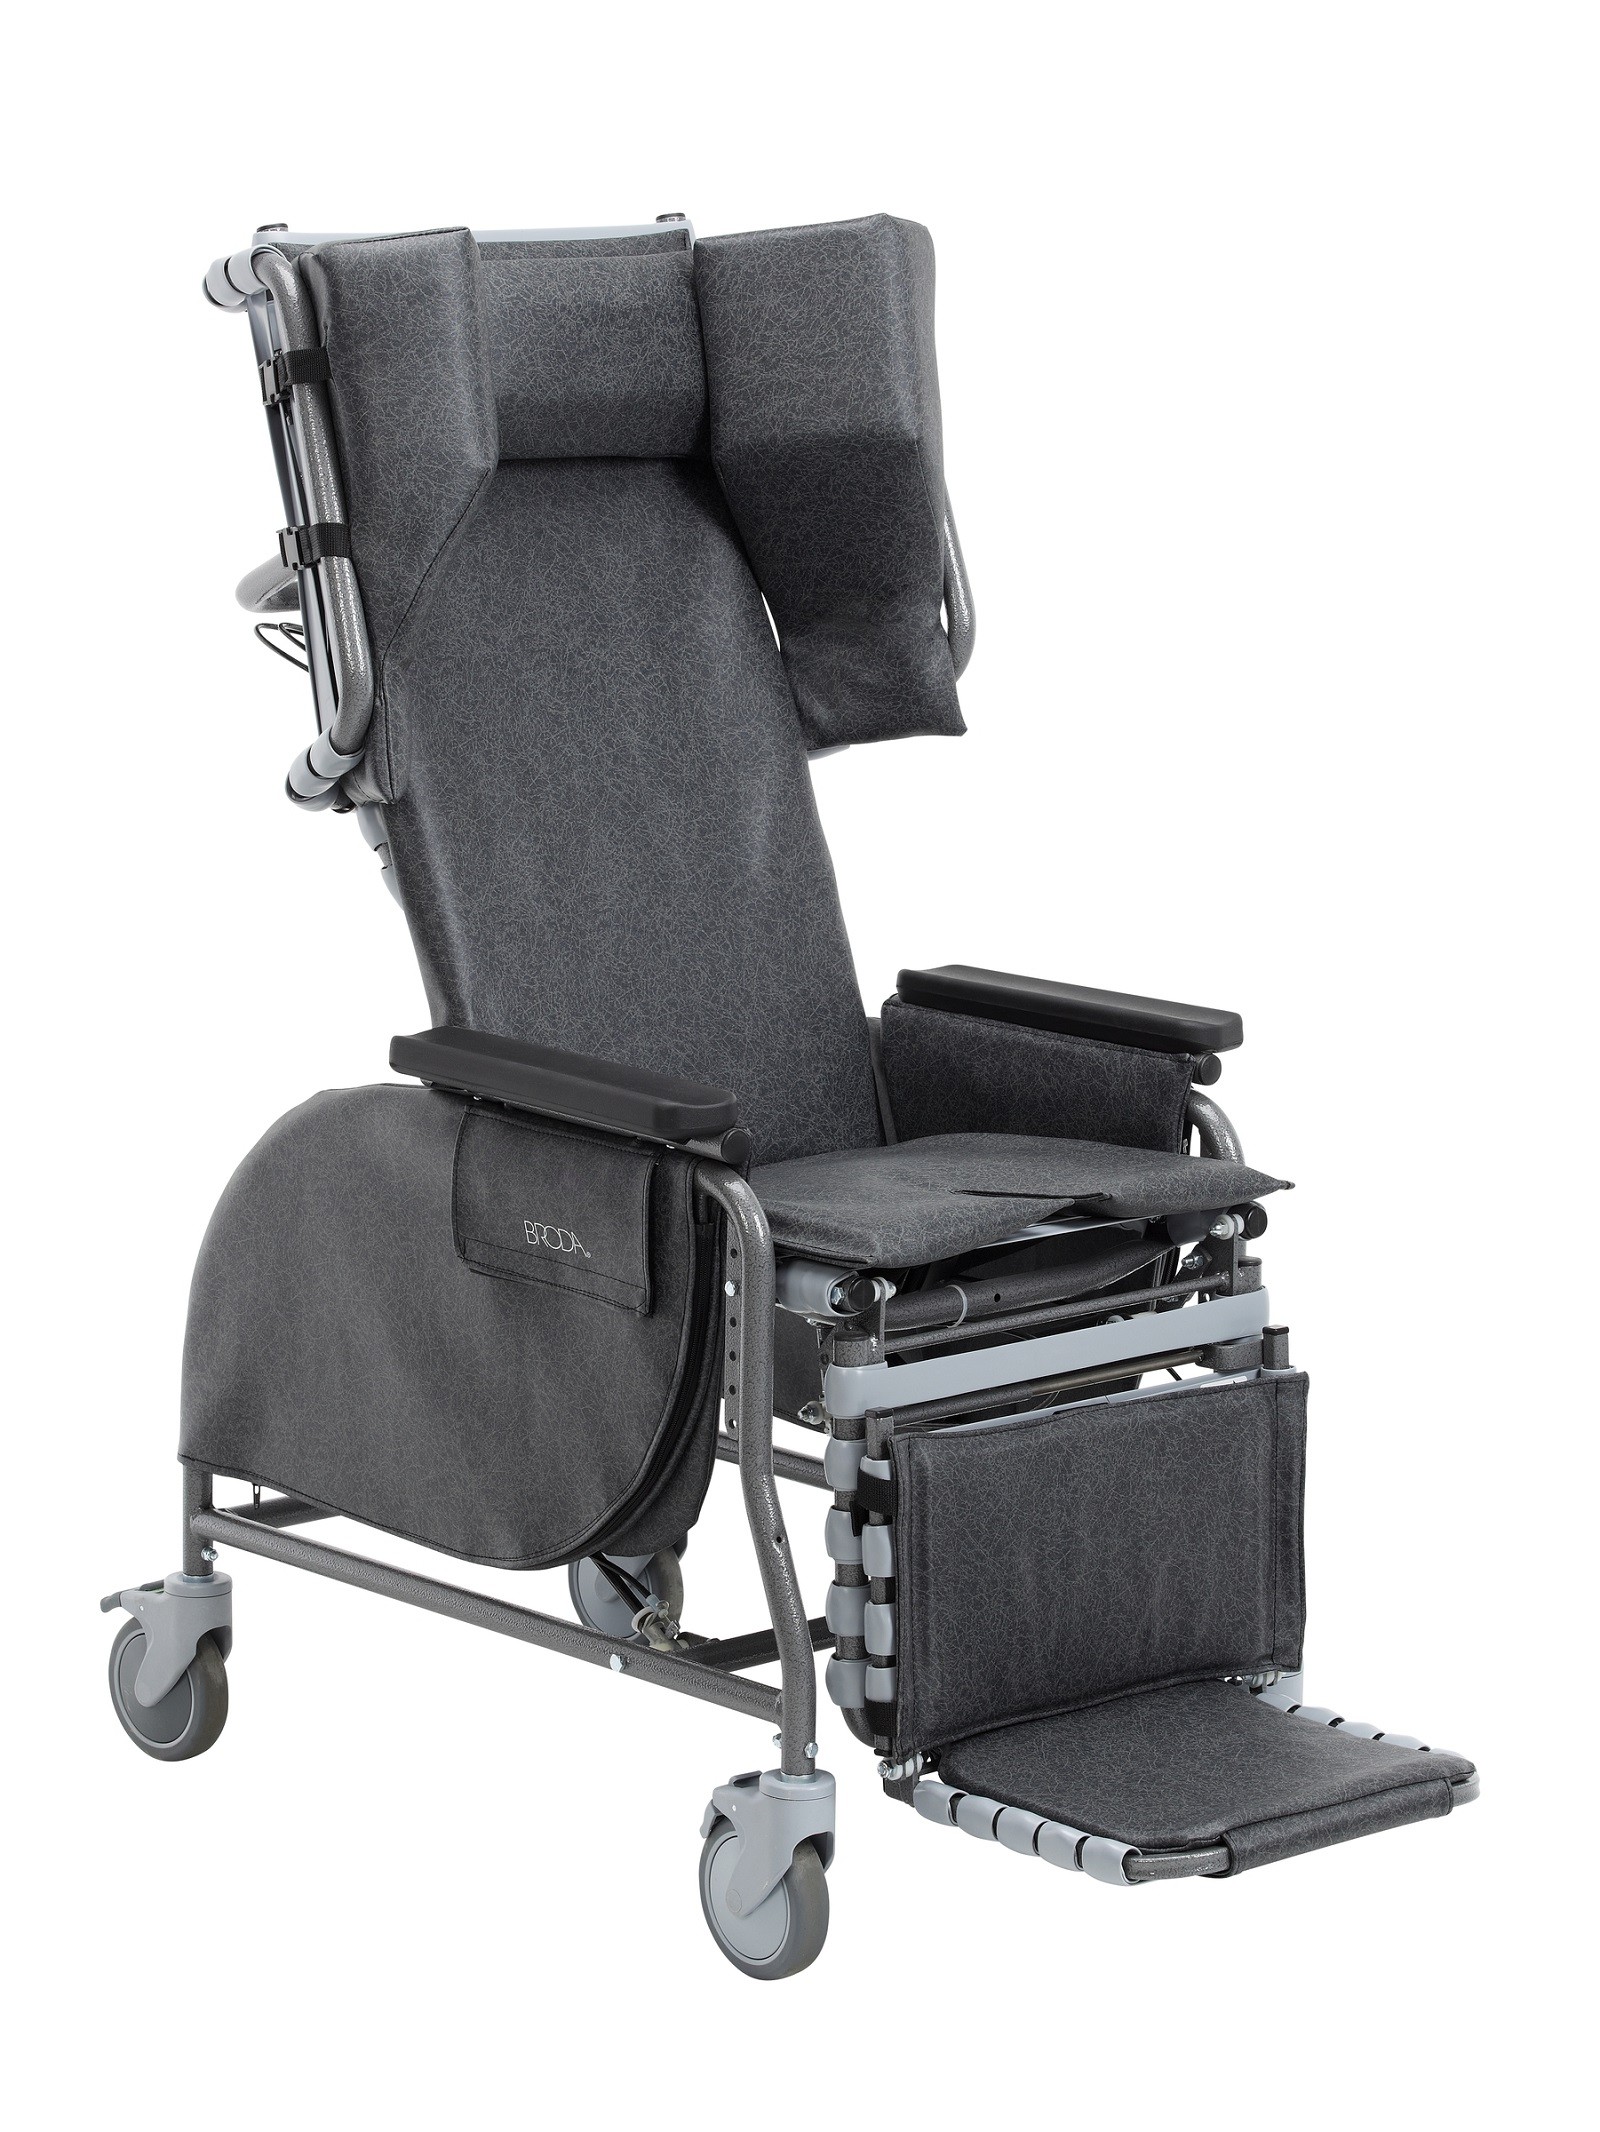 The Broda Midline Positioning Wheelchair in a basic configuration